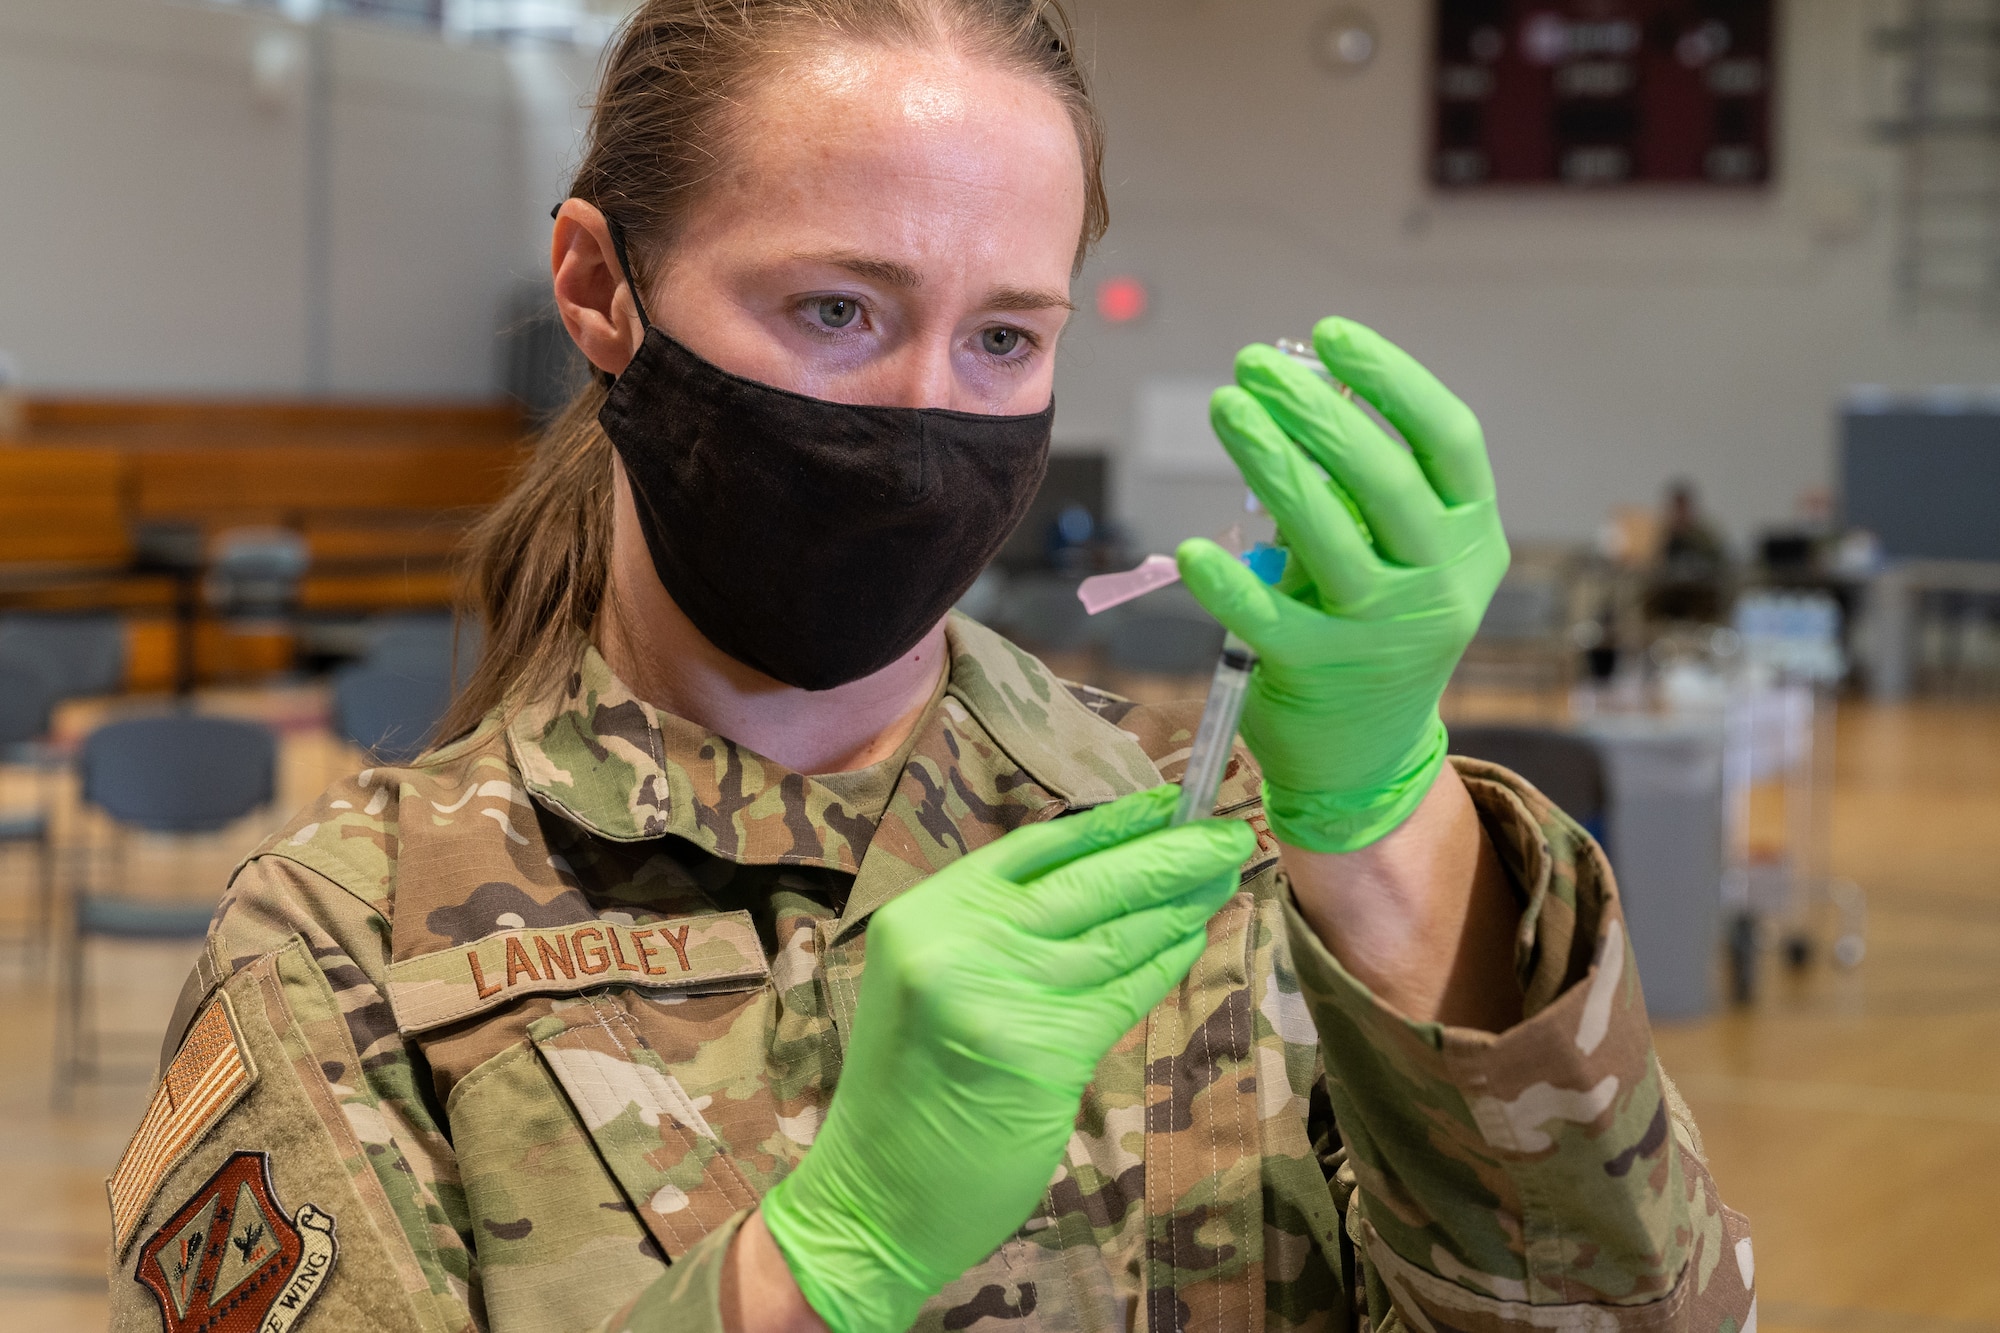 A woman in a military uniform carefully fill a medical syringe from a vial.